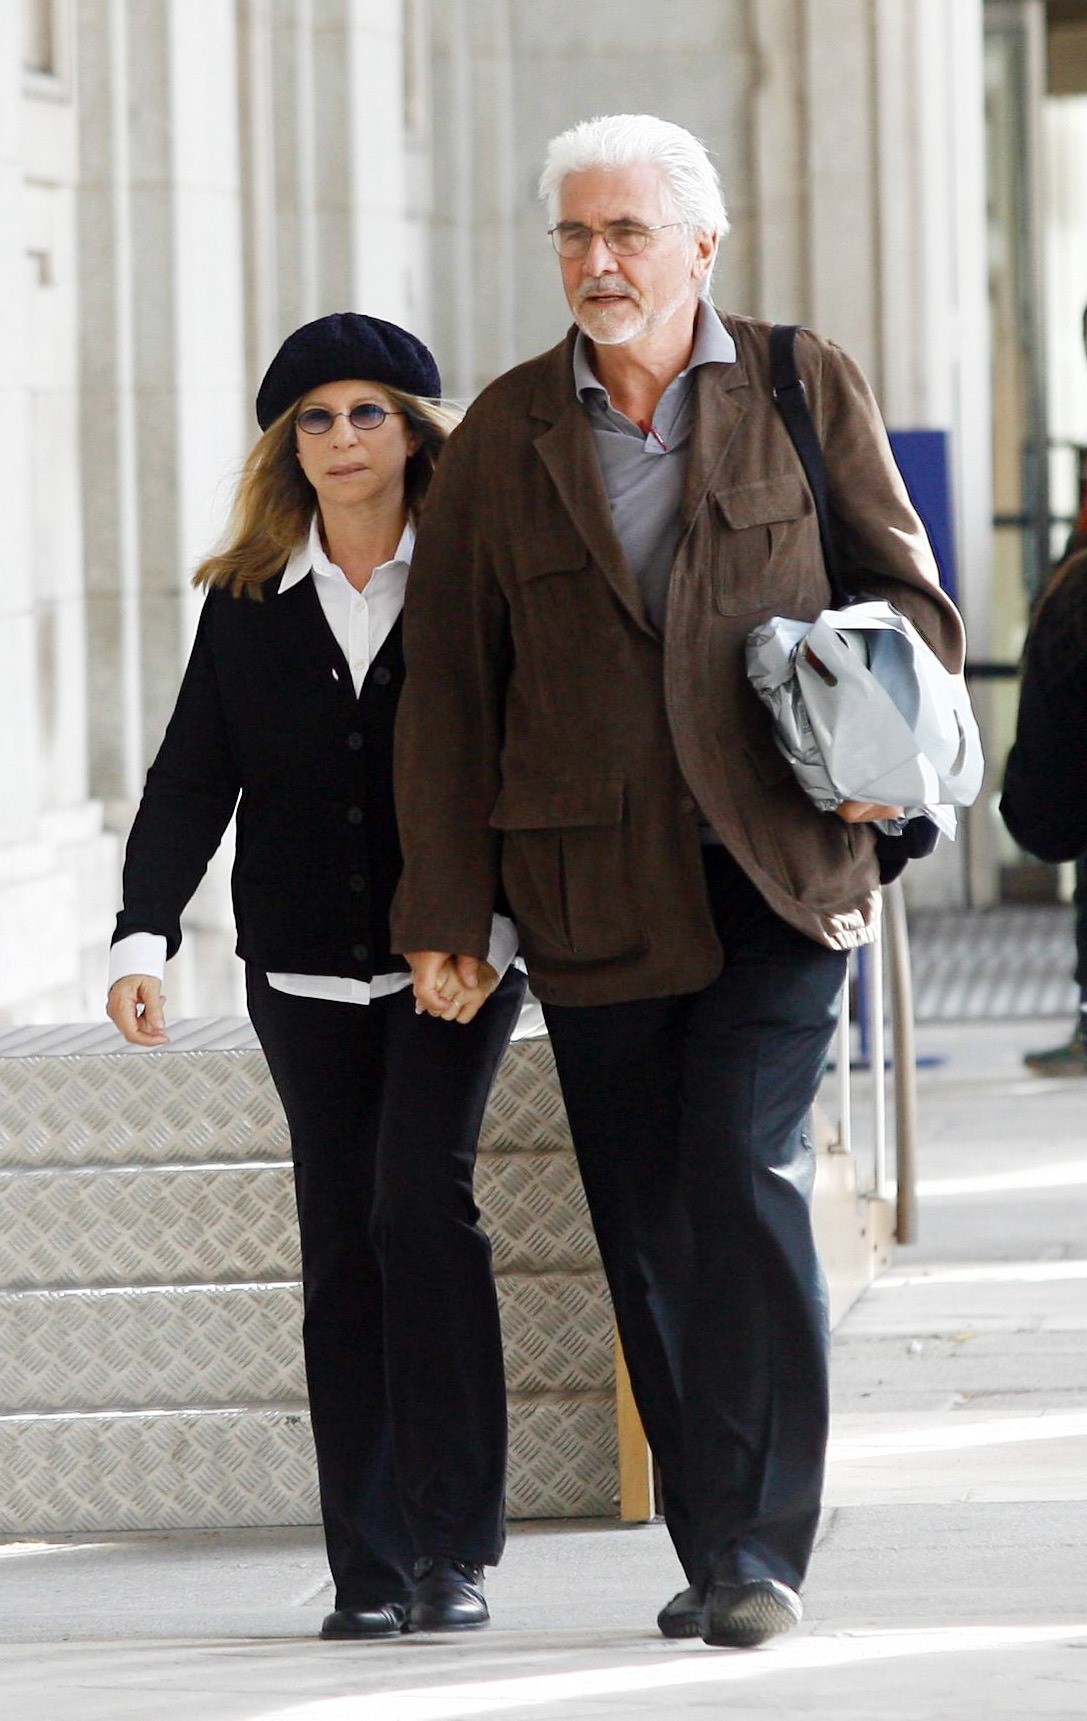 Barbra Streisand and James Brolin spotted in Madrid, Spain on October 29, 2010 | Source: Getty Images